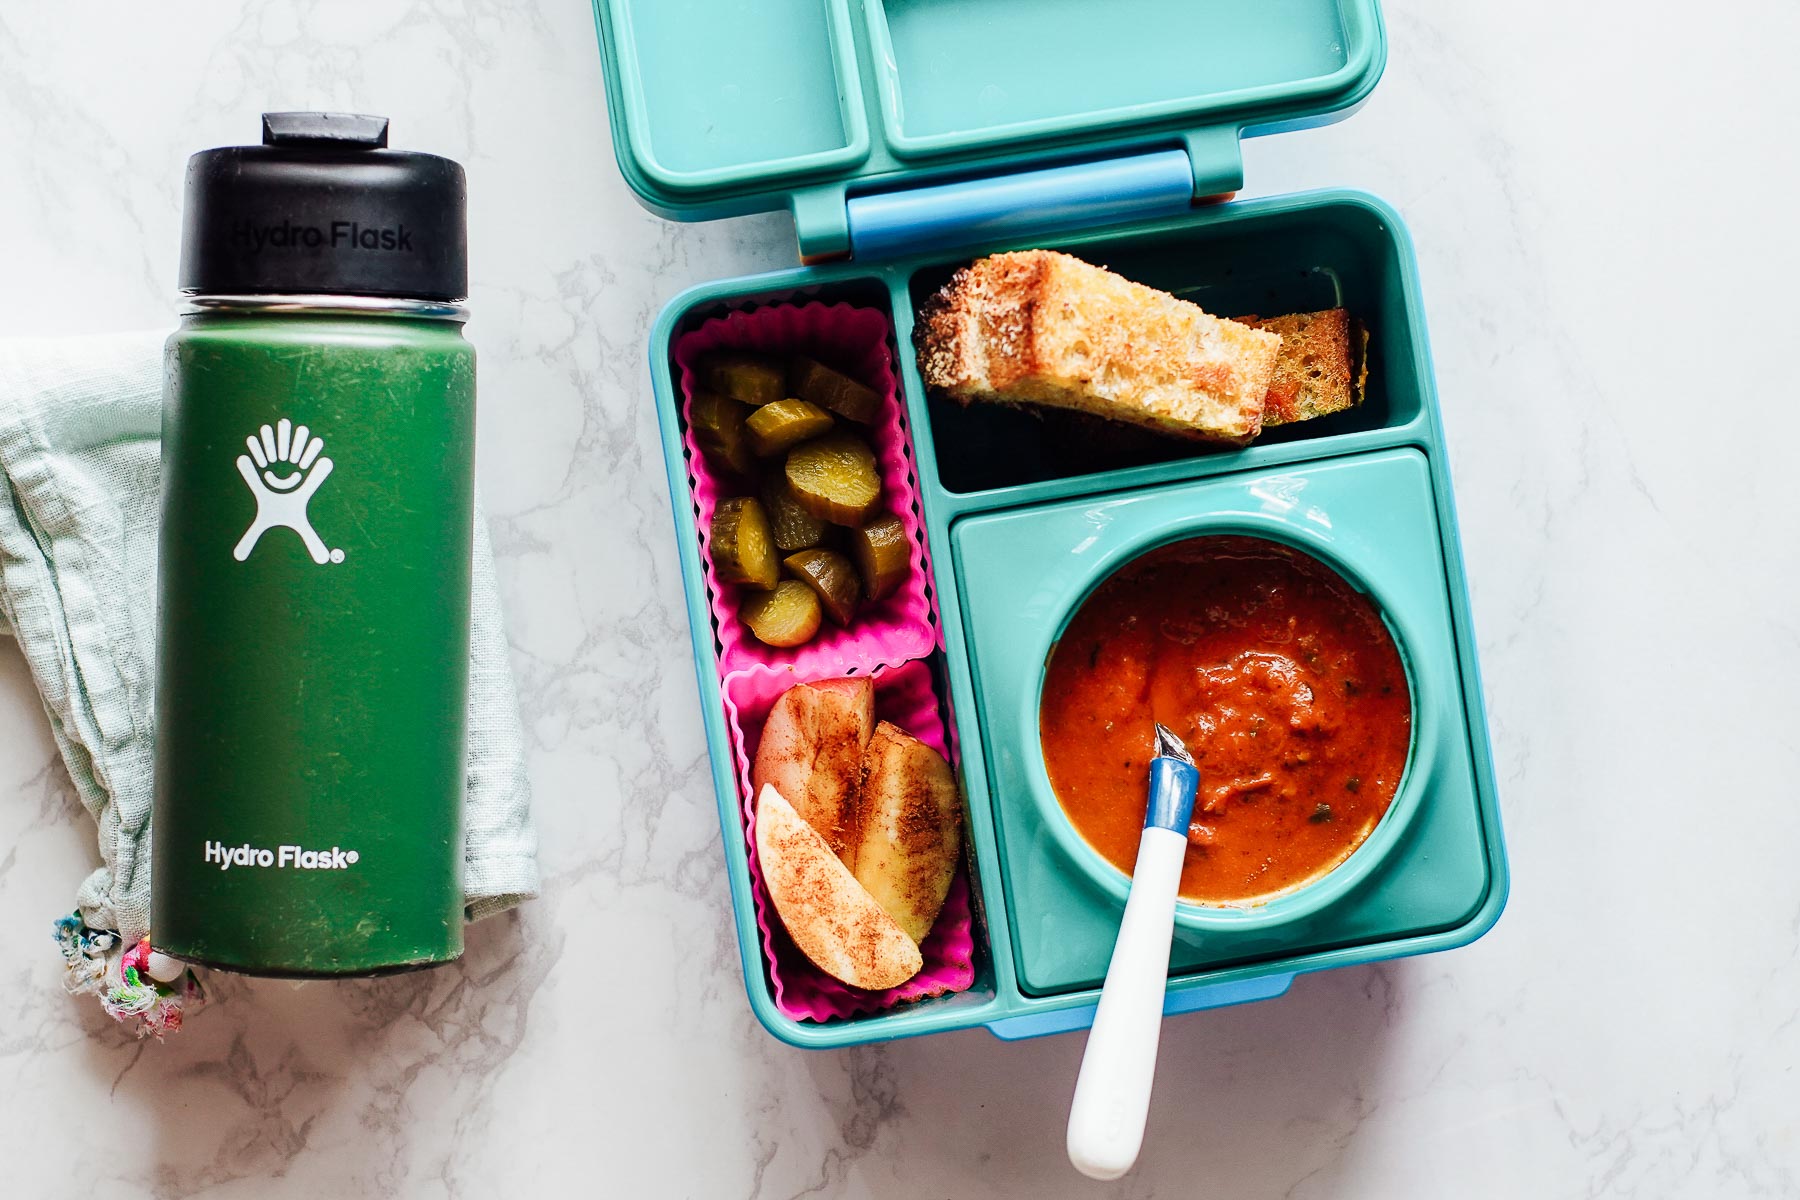 Lunchbox idea: tomato soup, grilled cheese sticks, pickles, and apple slices.